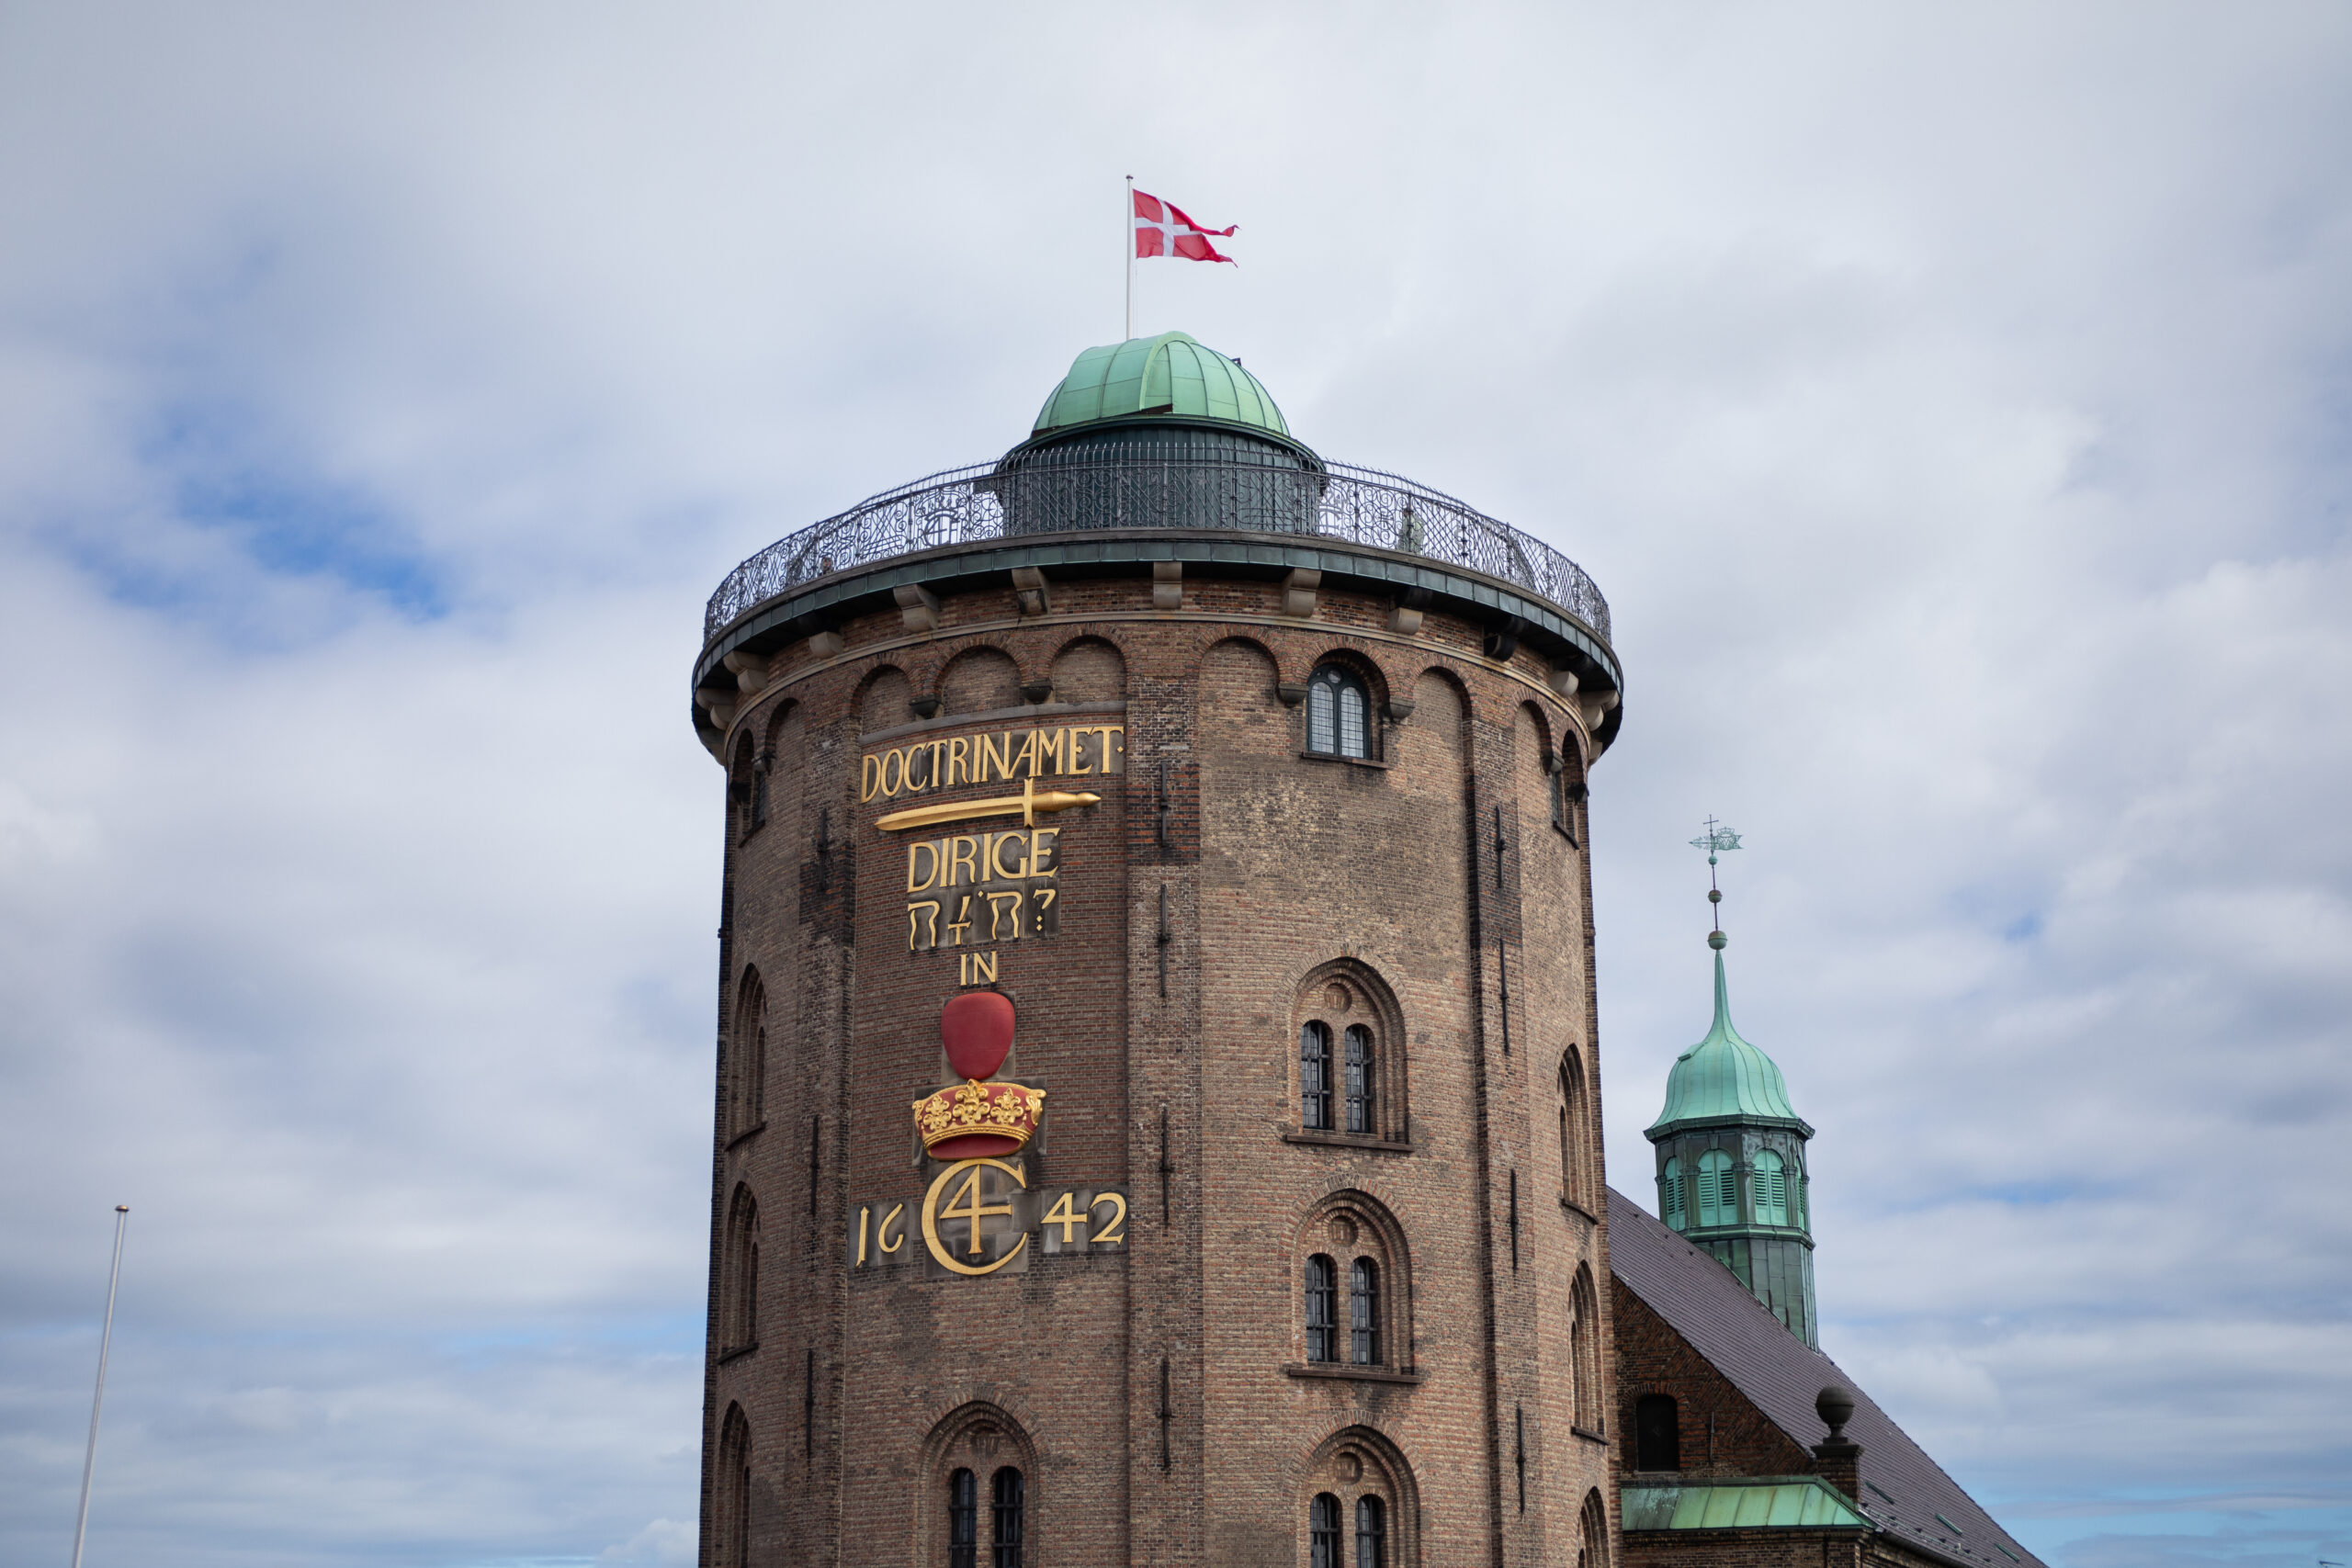 Hans Christian Andersen and the Round Tower - Rundetaarn